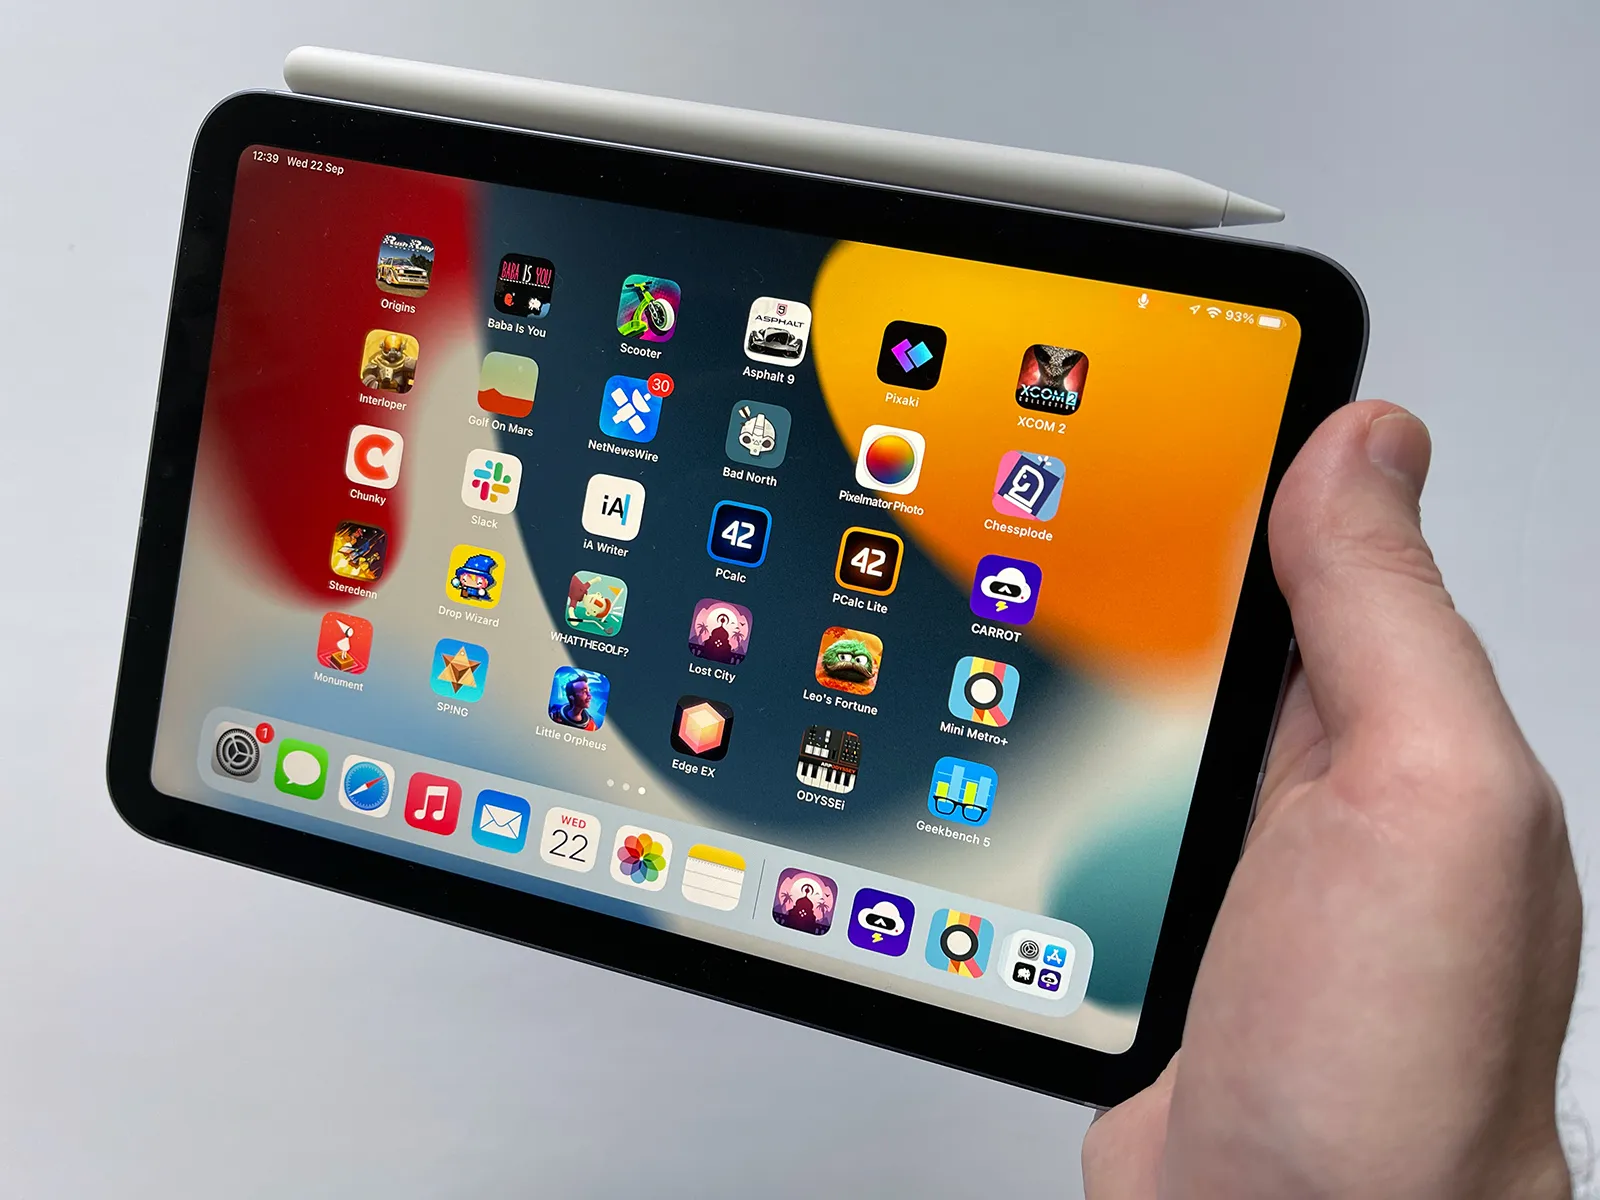 Apple iPad Air 6: Release date rumors, news, and more